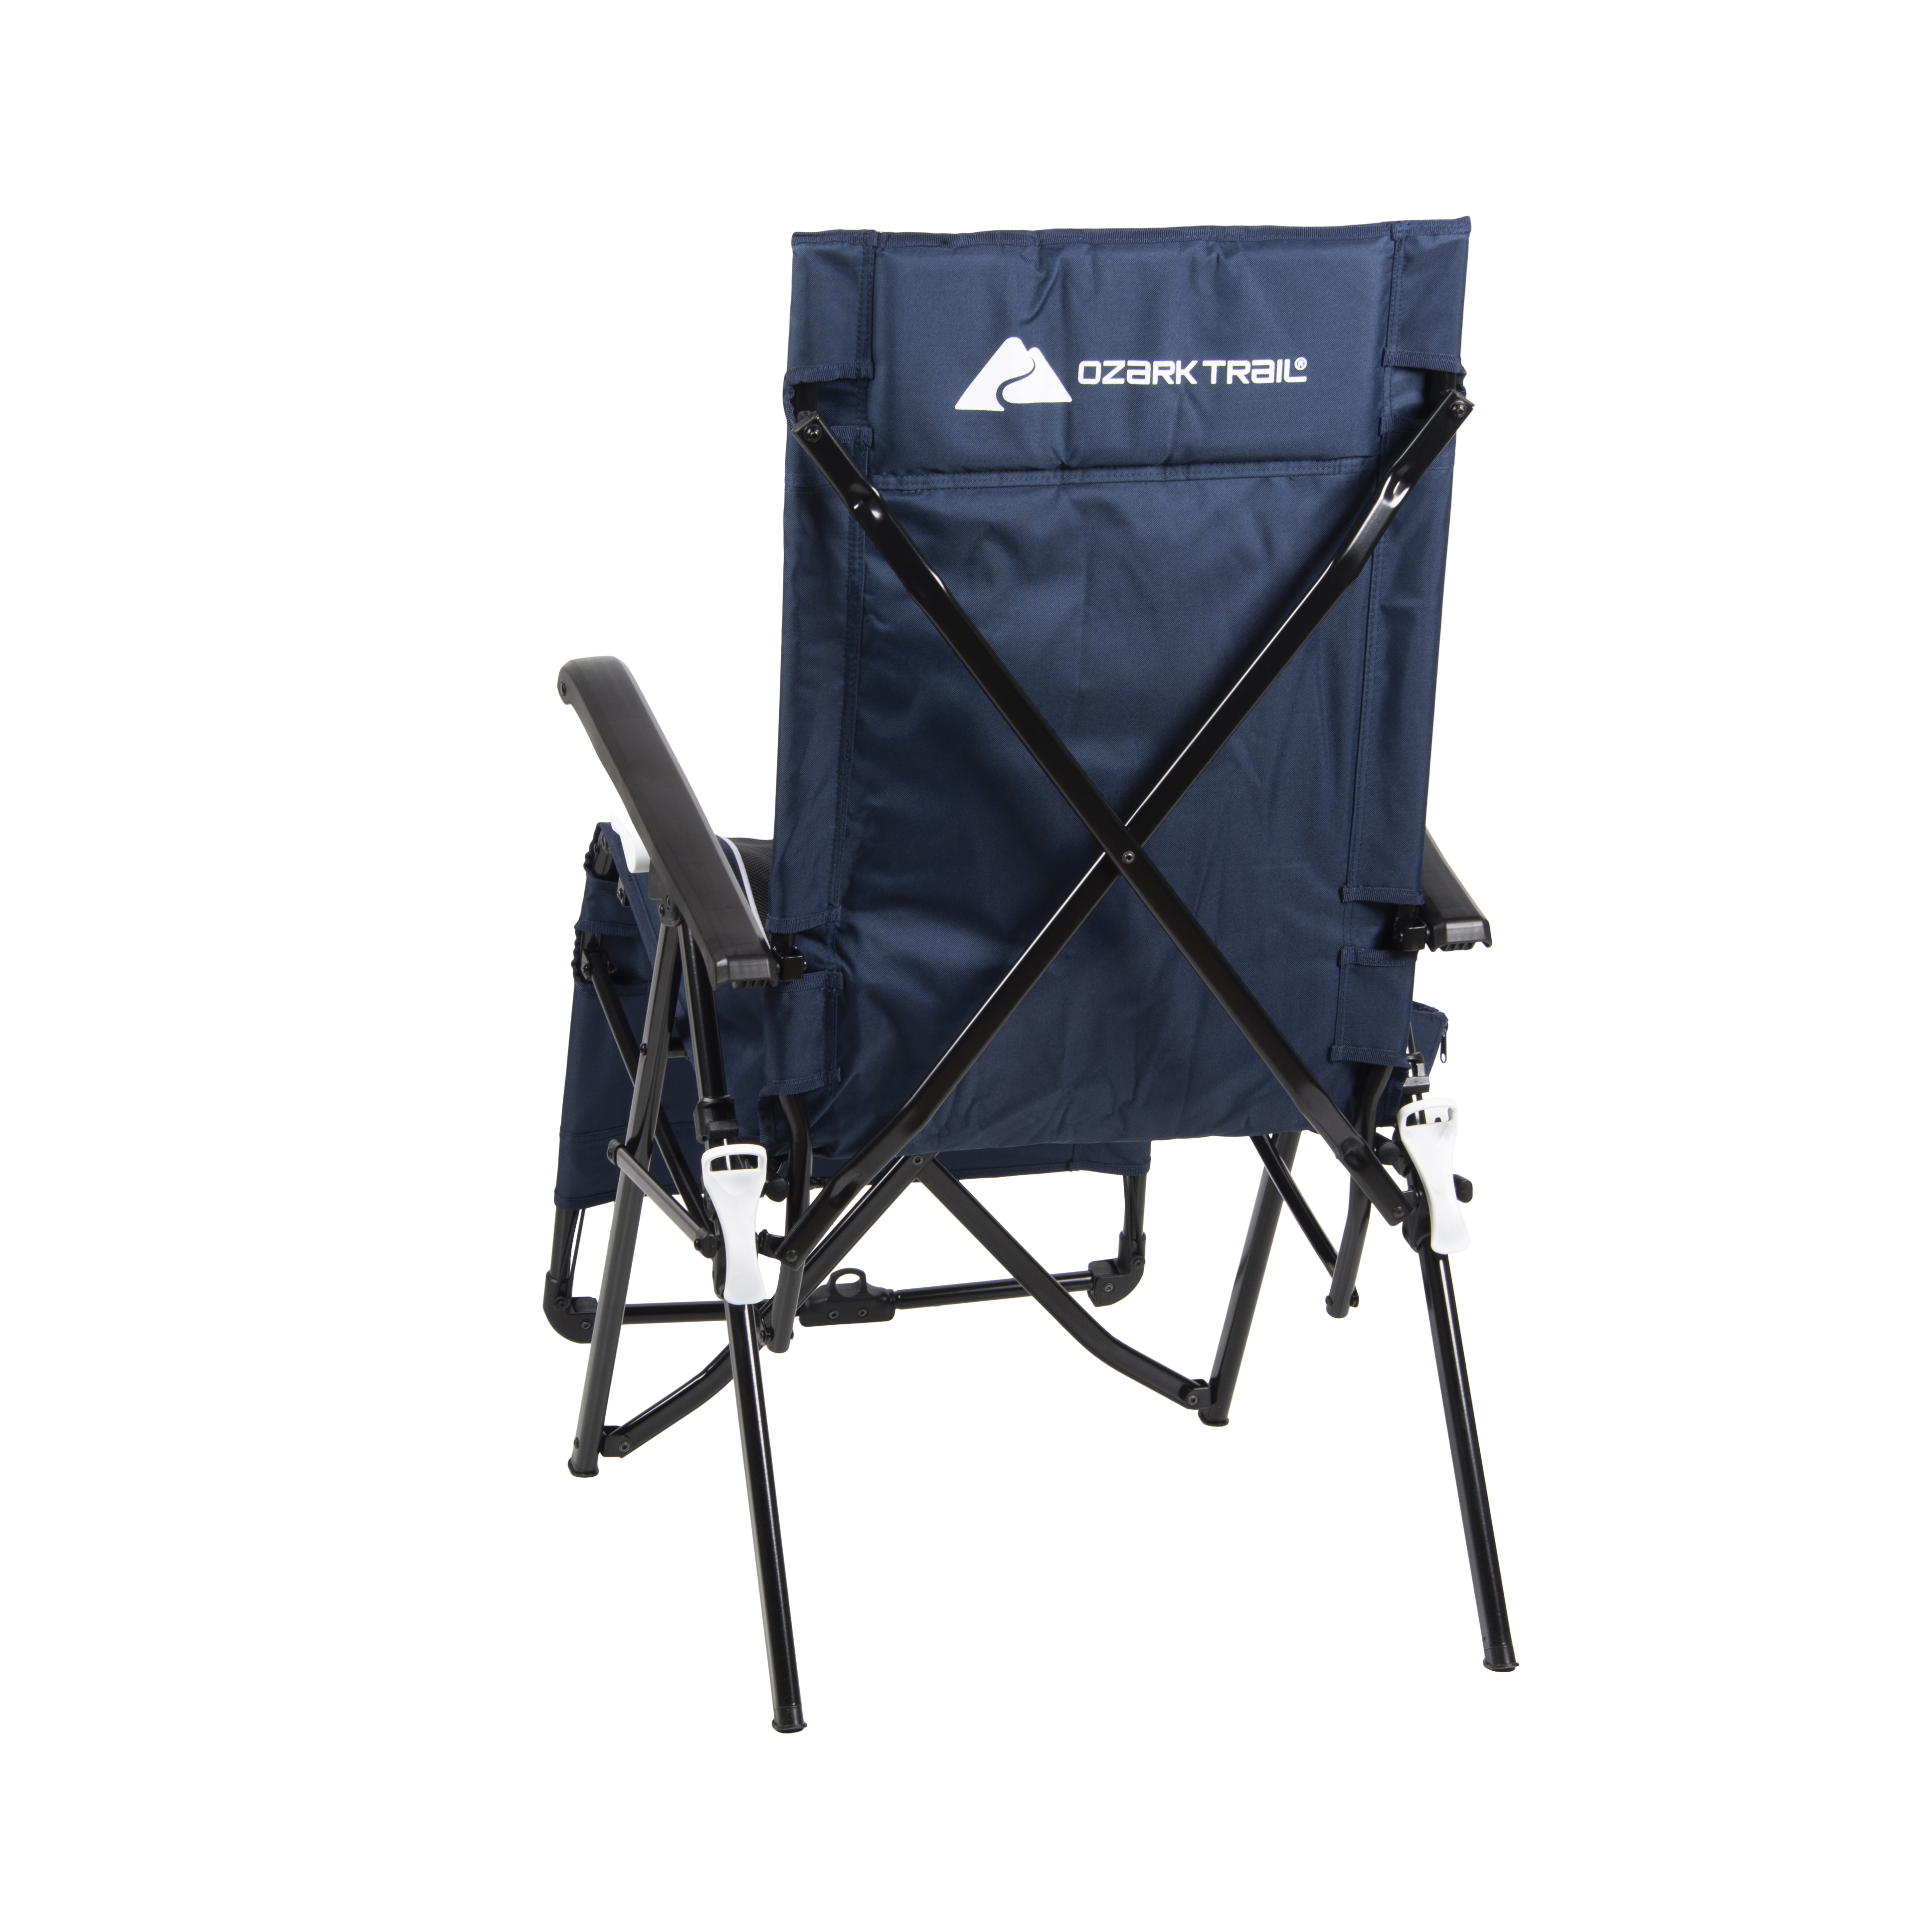 Ozark Trail Quad Zero Gravity Lounger Camping Chair, Blue, Adult, 20.3lbs